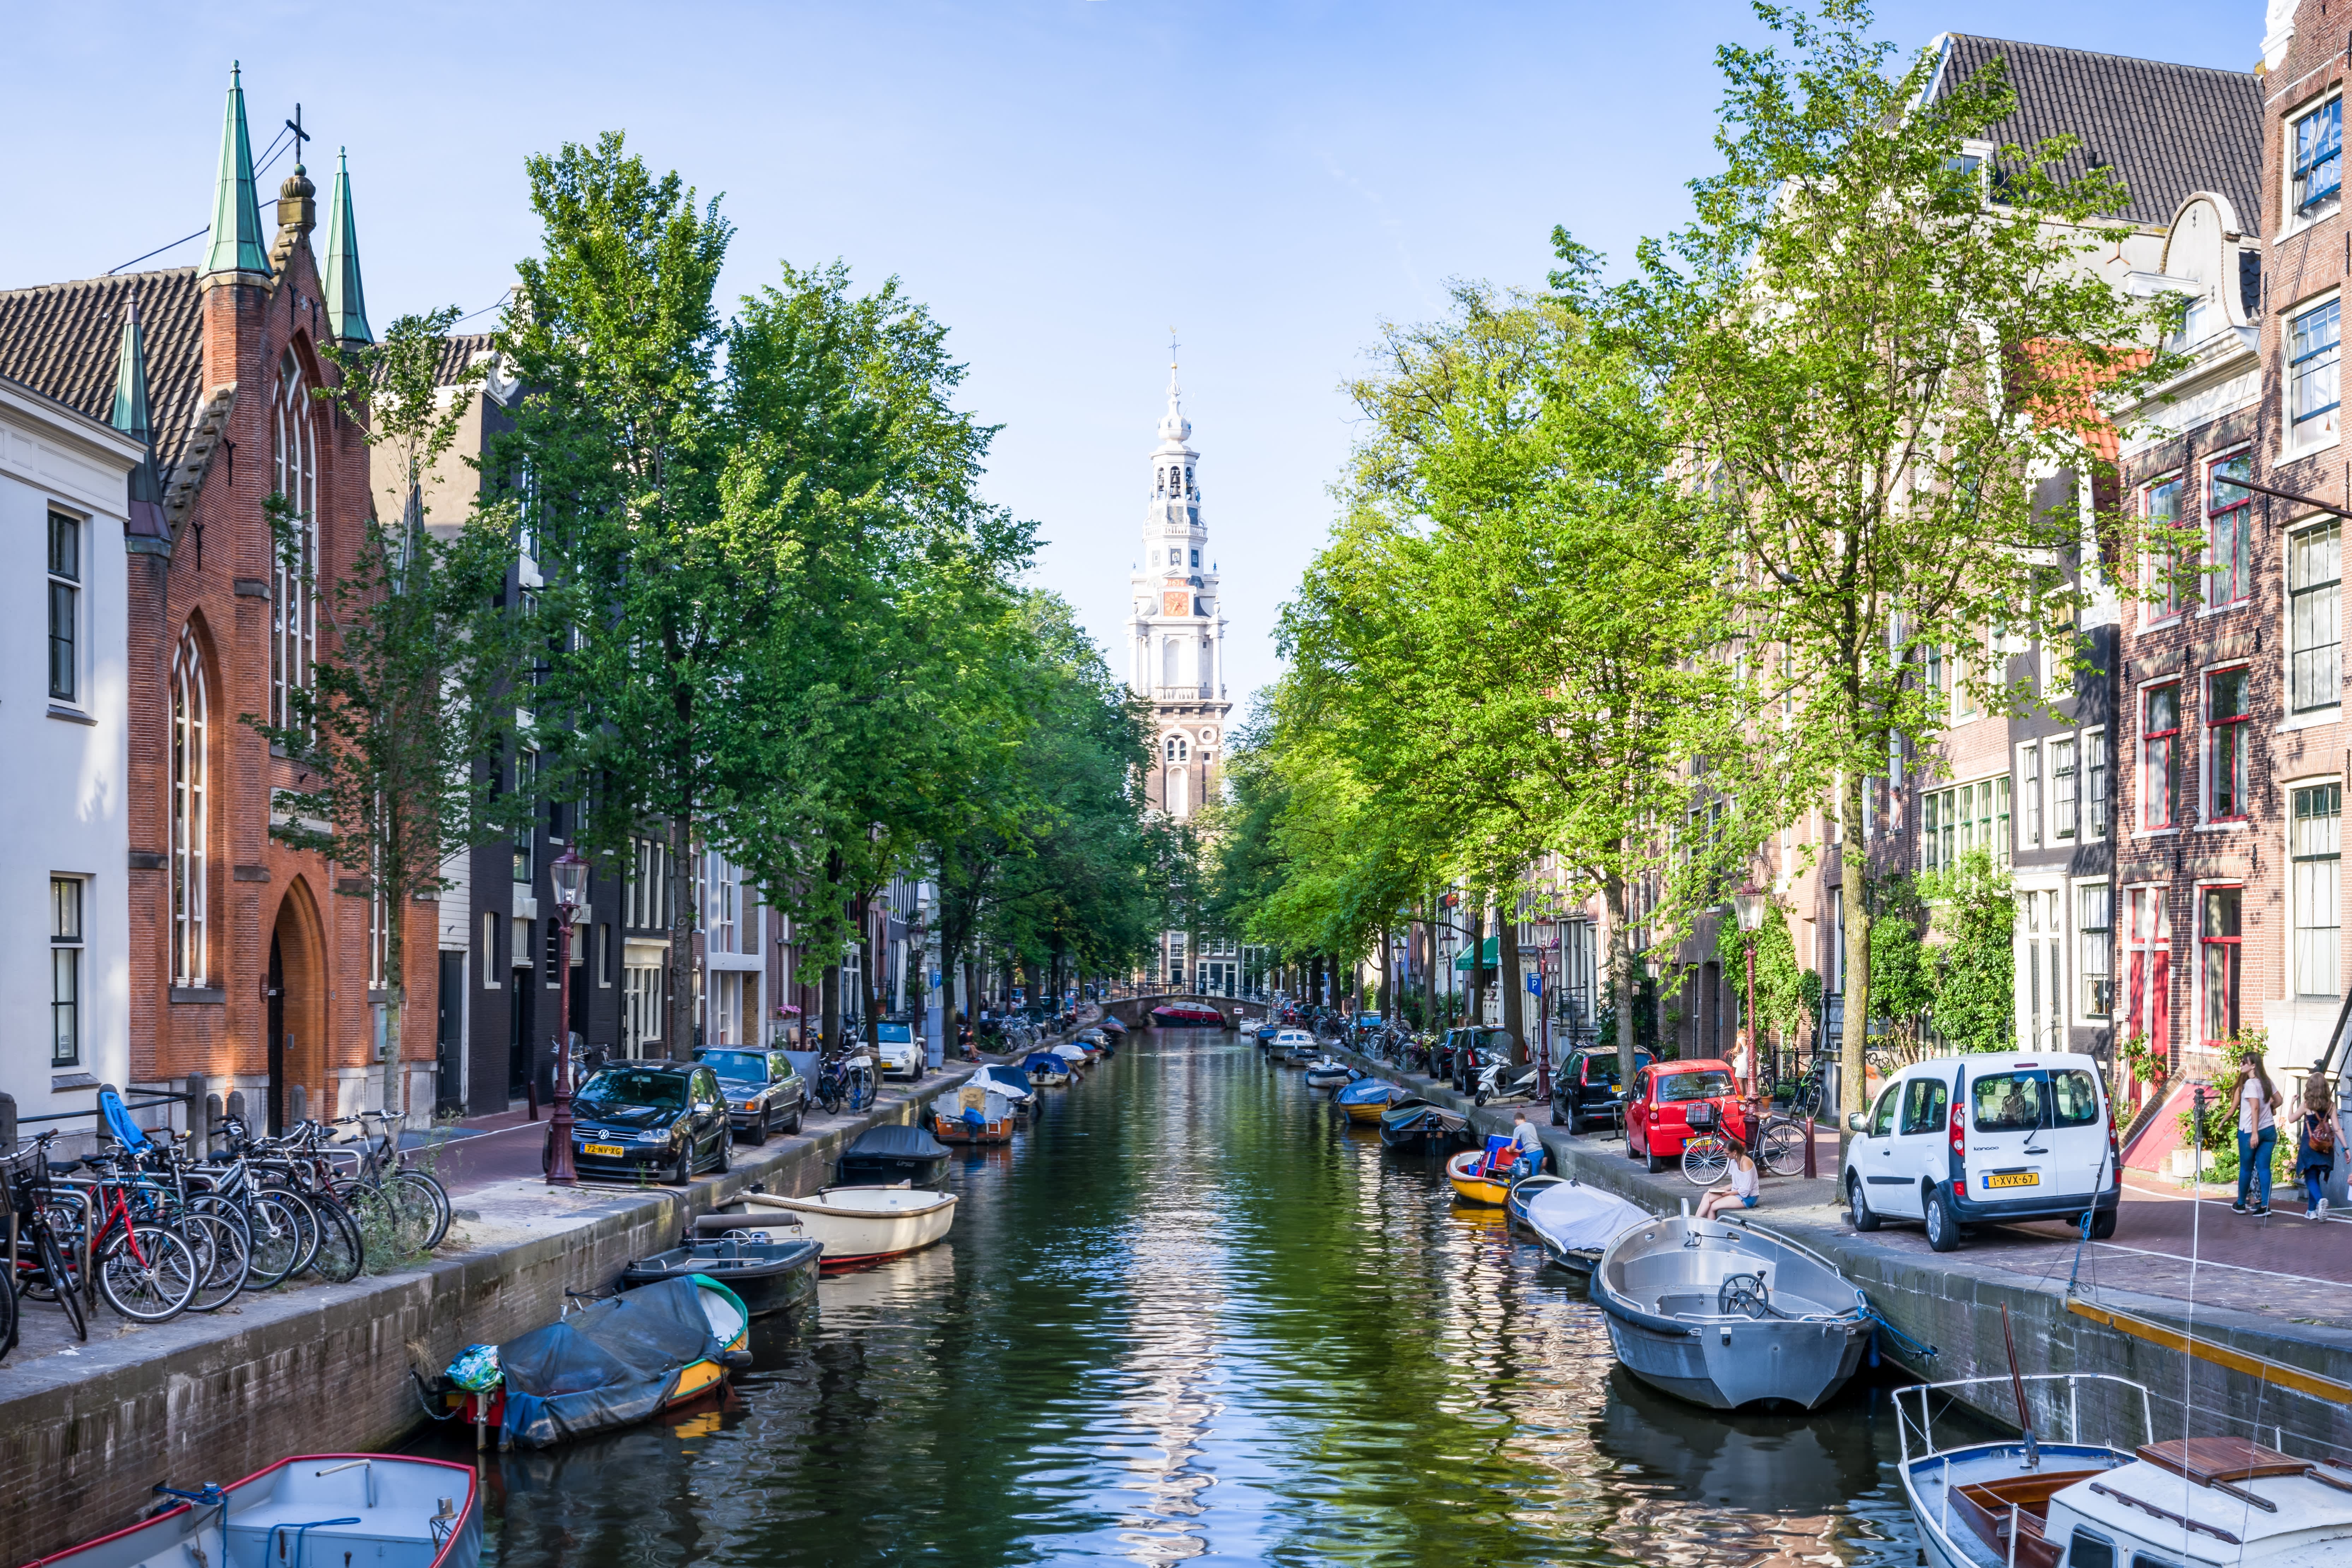 Image of a canal in Amsterdam Centrum, with boats and a church bell tower on the background